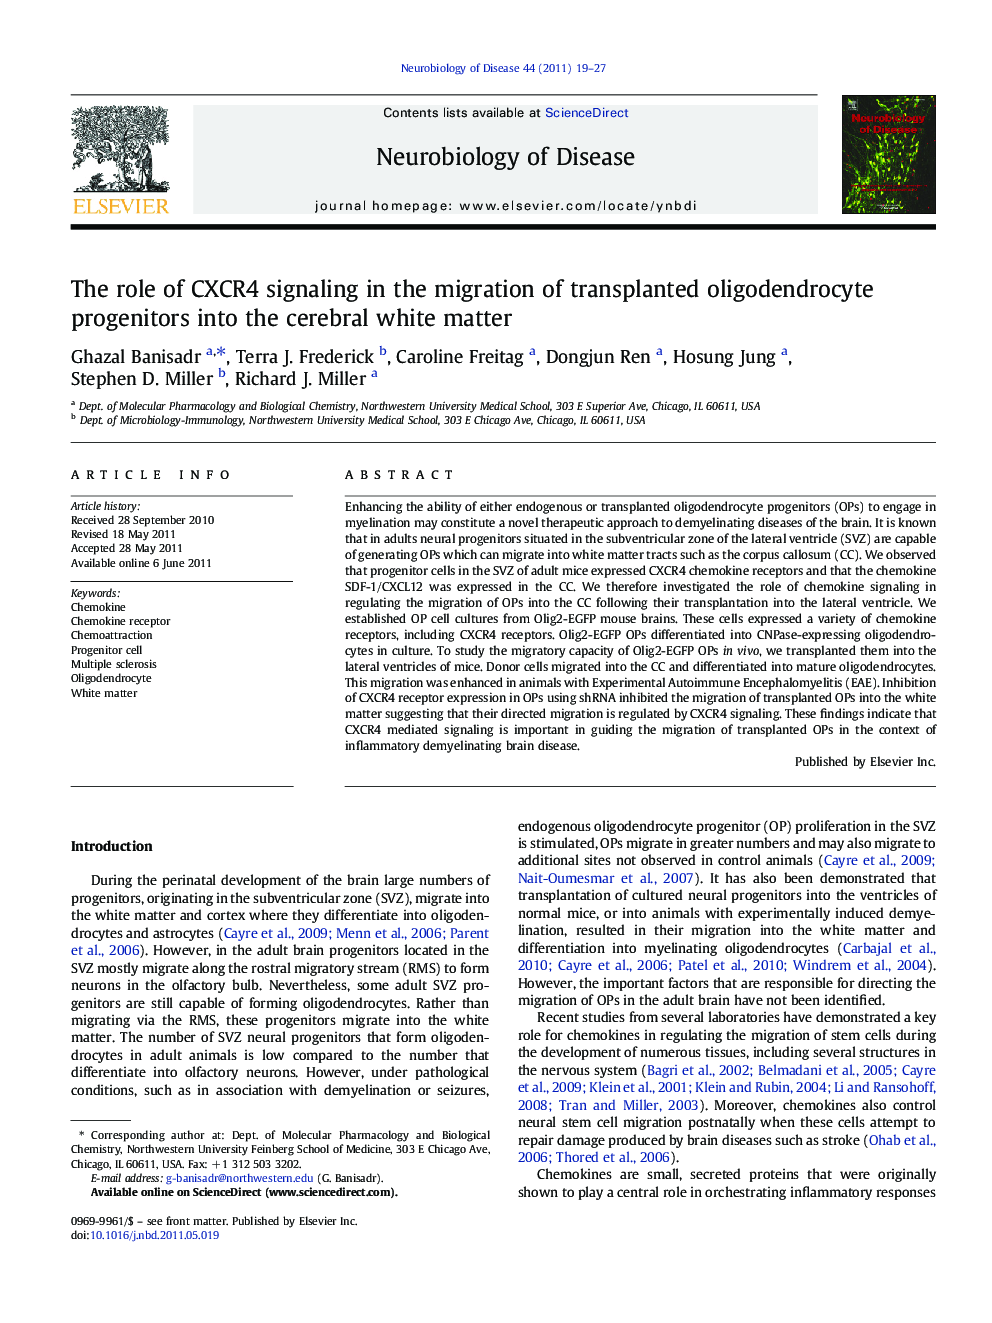 The role of CXCR4 signaling in the migration of transplanted oligodendrocyte progenitors into the cerebral white matter